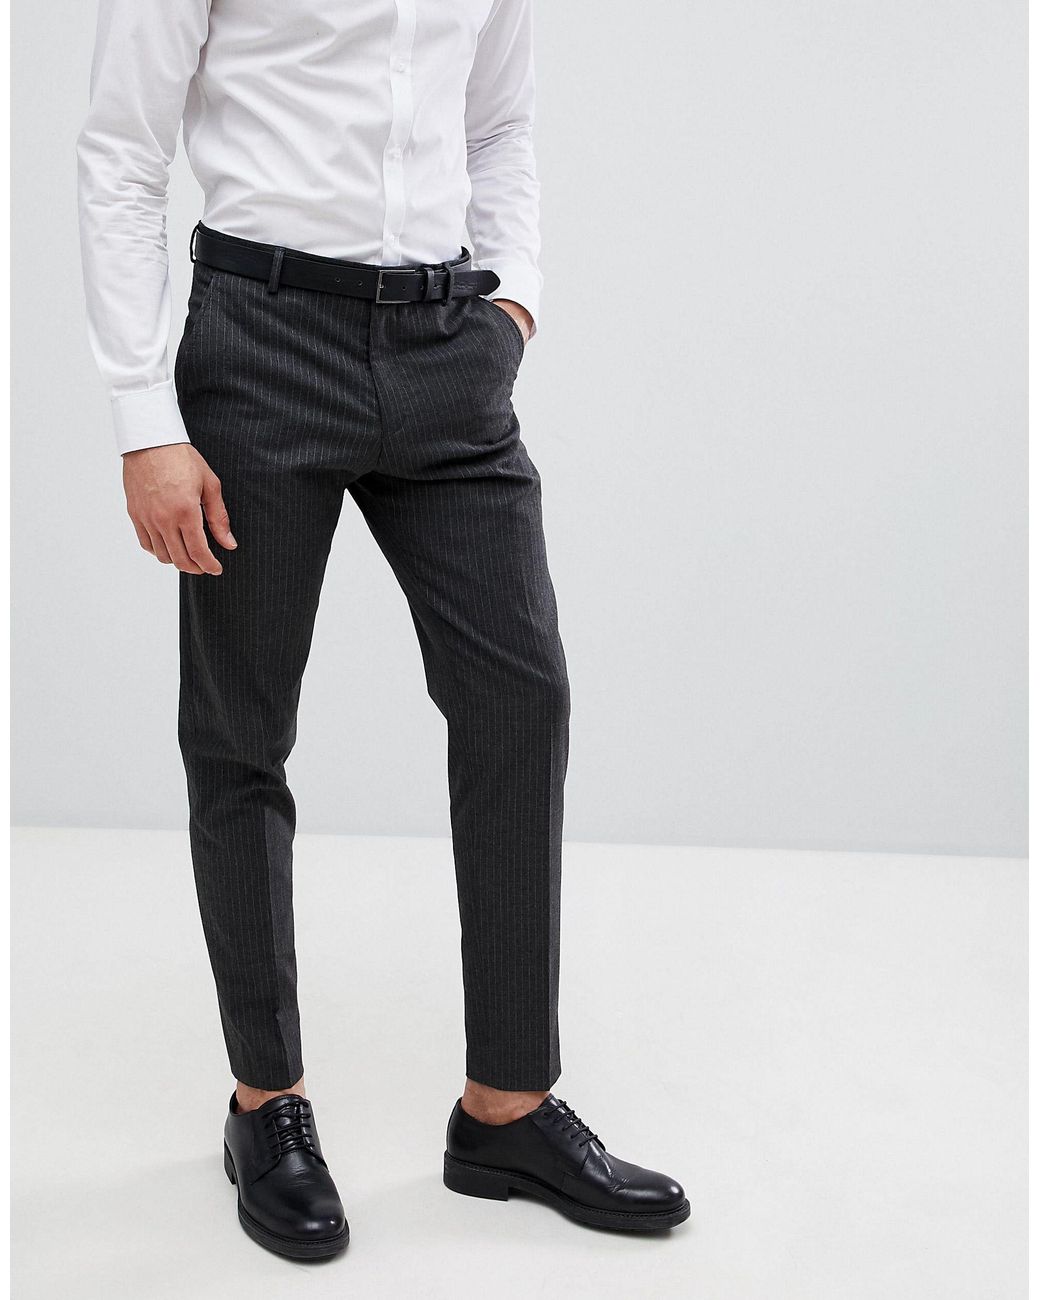 ASOS DESIGN tapered suit trousers in camel tonic | ASOS